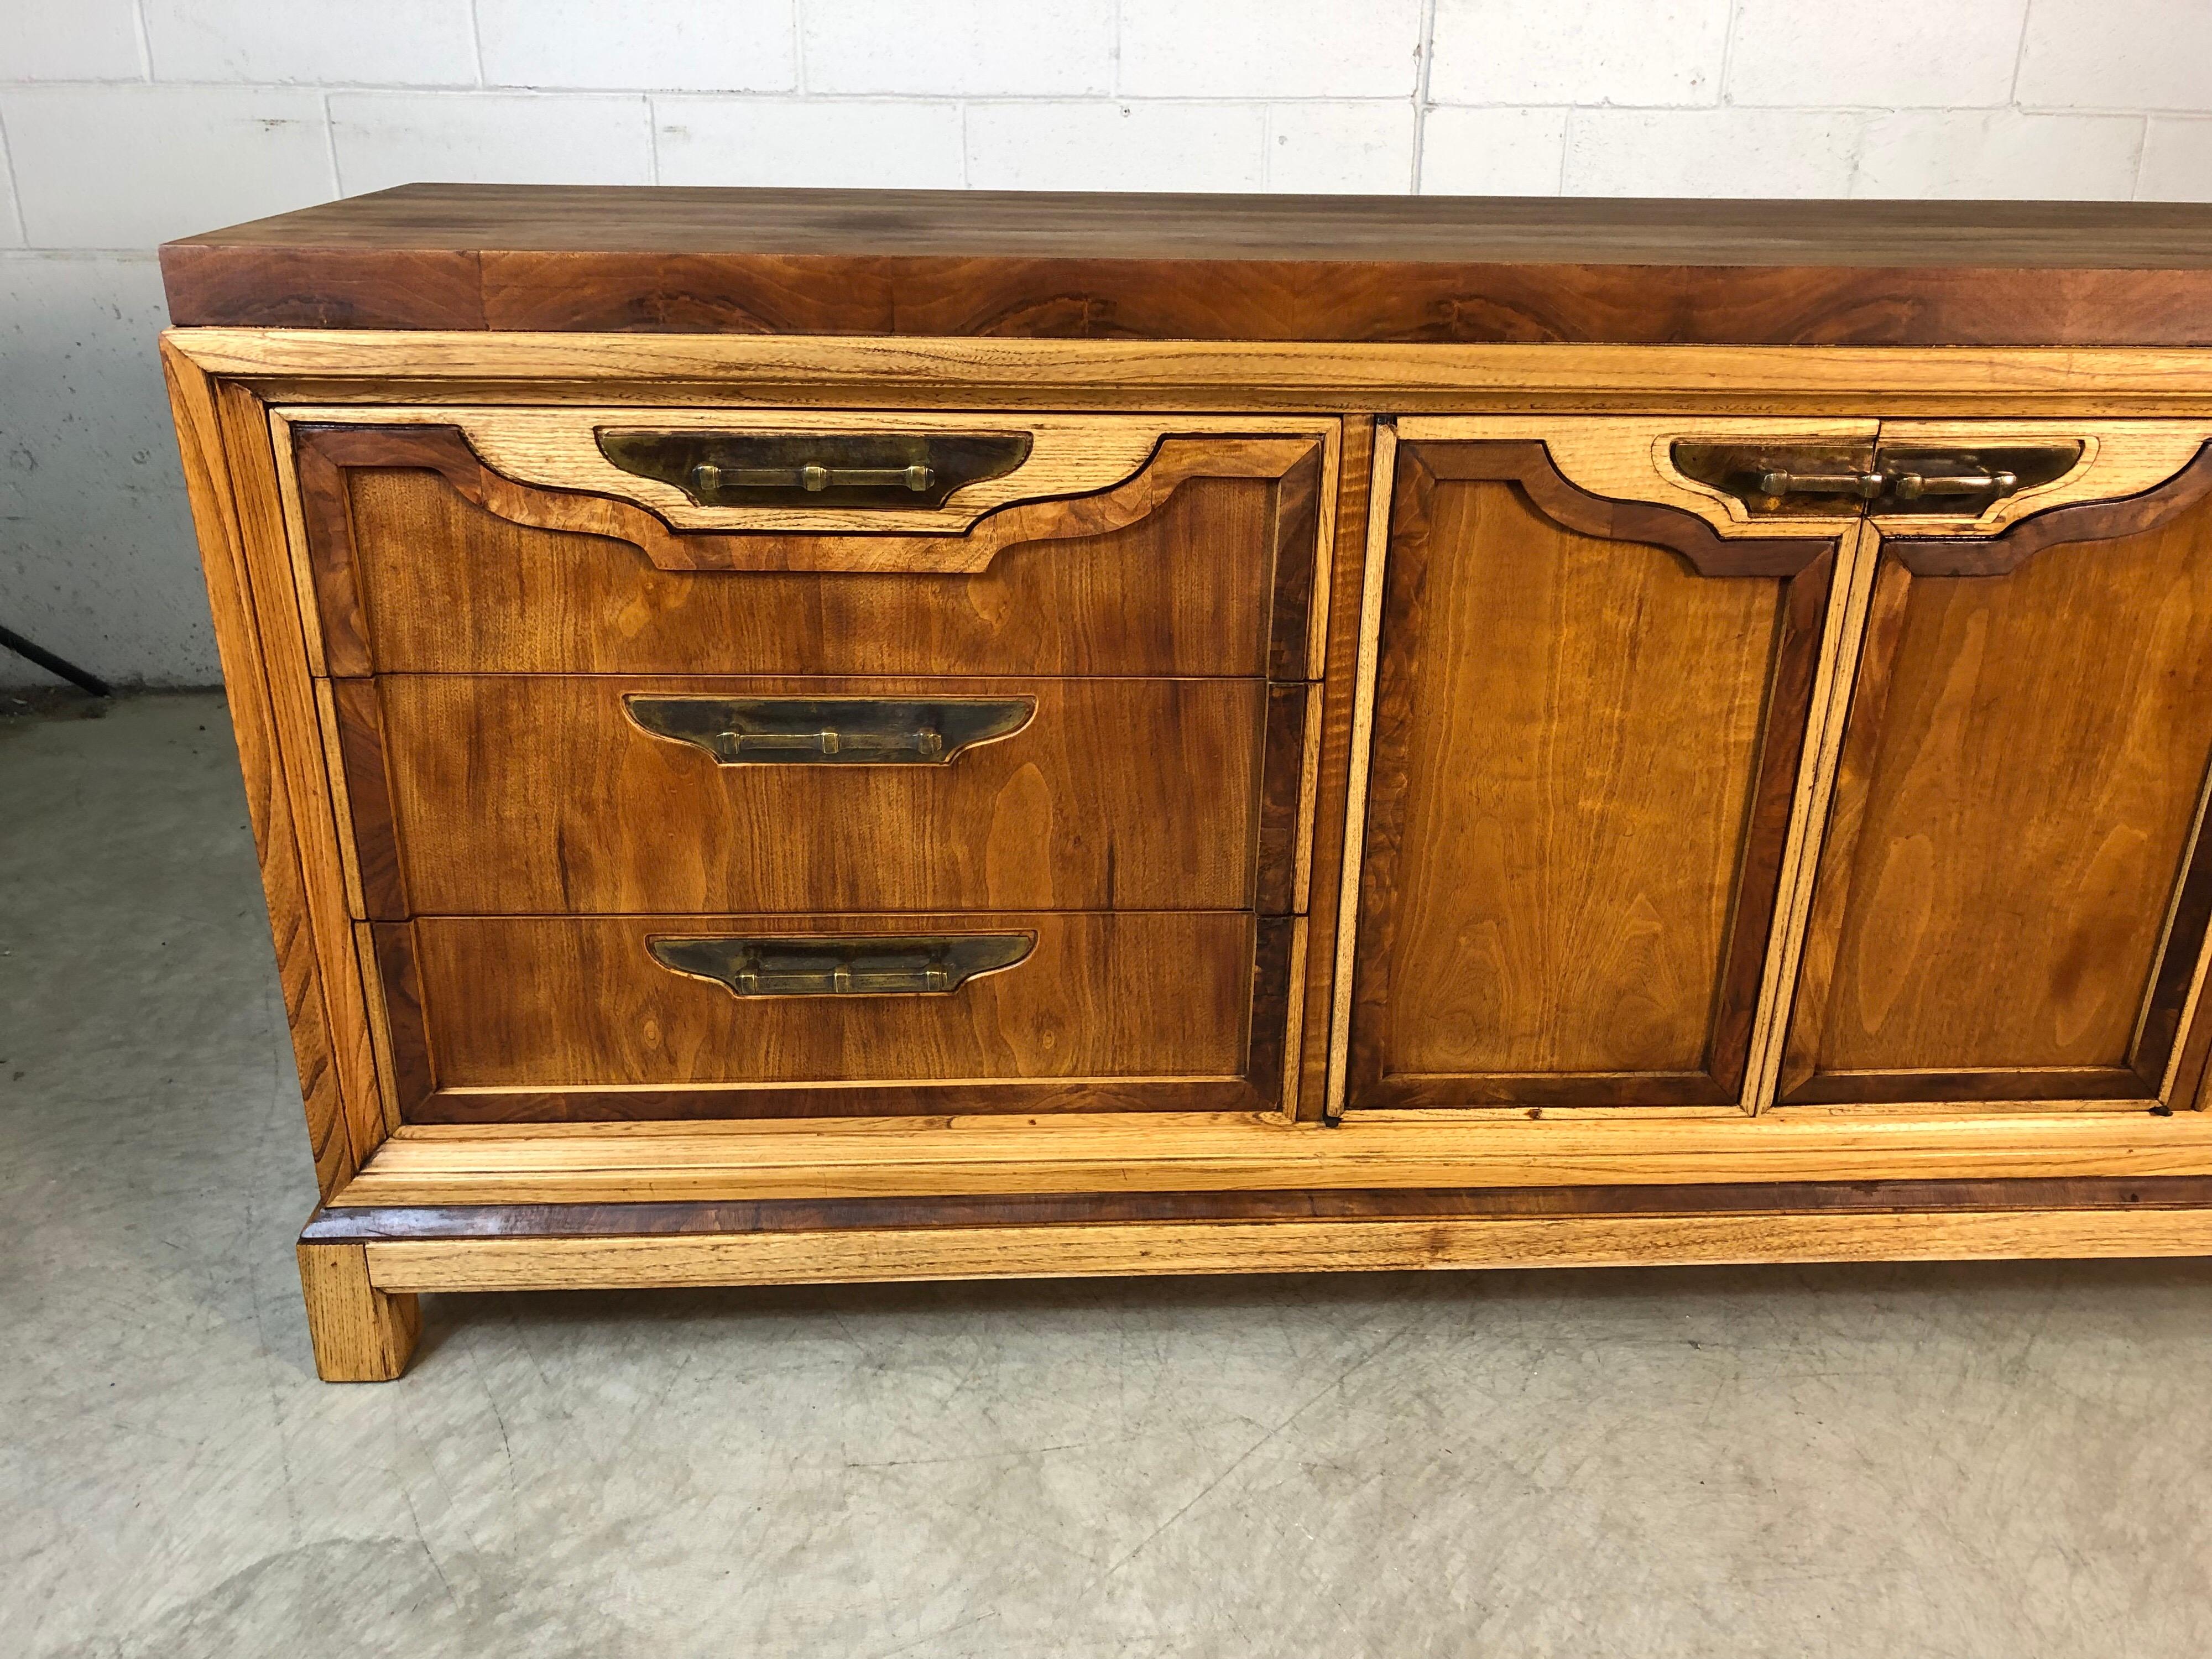 Mid-Century Modern 1960s walnut and ashwood low dresser with nine drawers for storage. The dresser is by Fancher Furniture Co and has been refinished to show the mix of woods. The dresser is in excellent refinished condition.